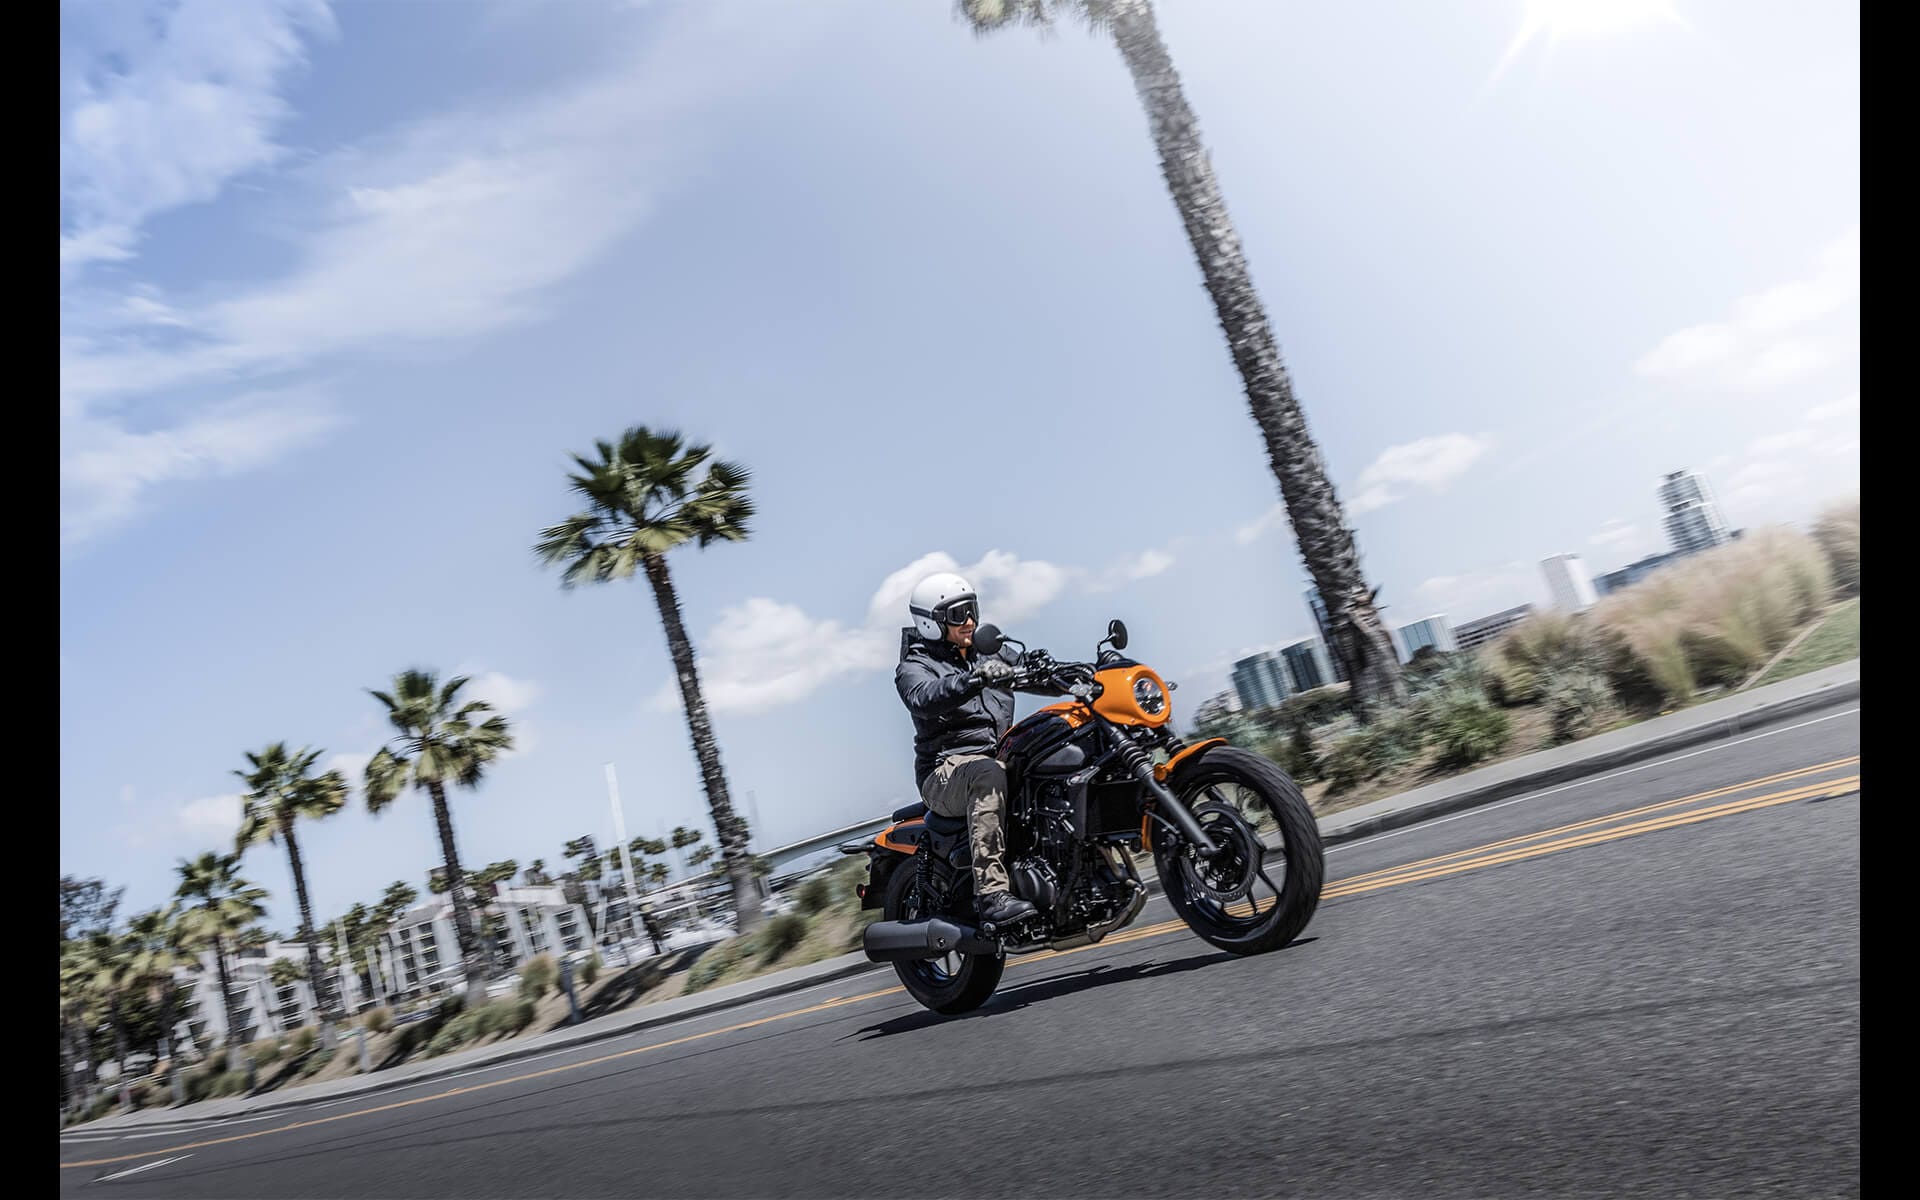 The SE variant of the motorcycle comes with unique color schemes that are exclusively available for this model. It also features a distinct seat design, a stylish headlight cowl, fork boots, and an added bonus of a waterproof USB C outlet for convenient charging on the go.